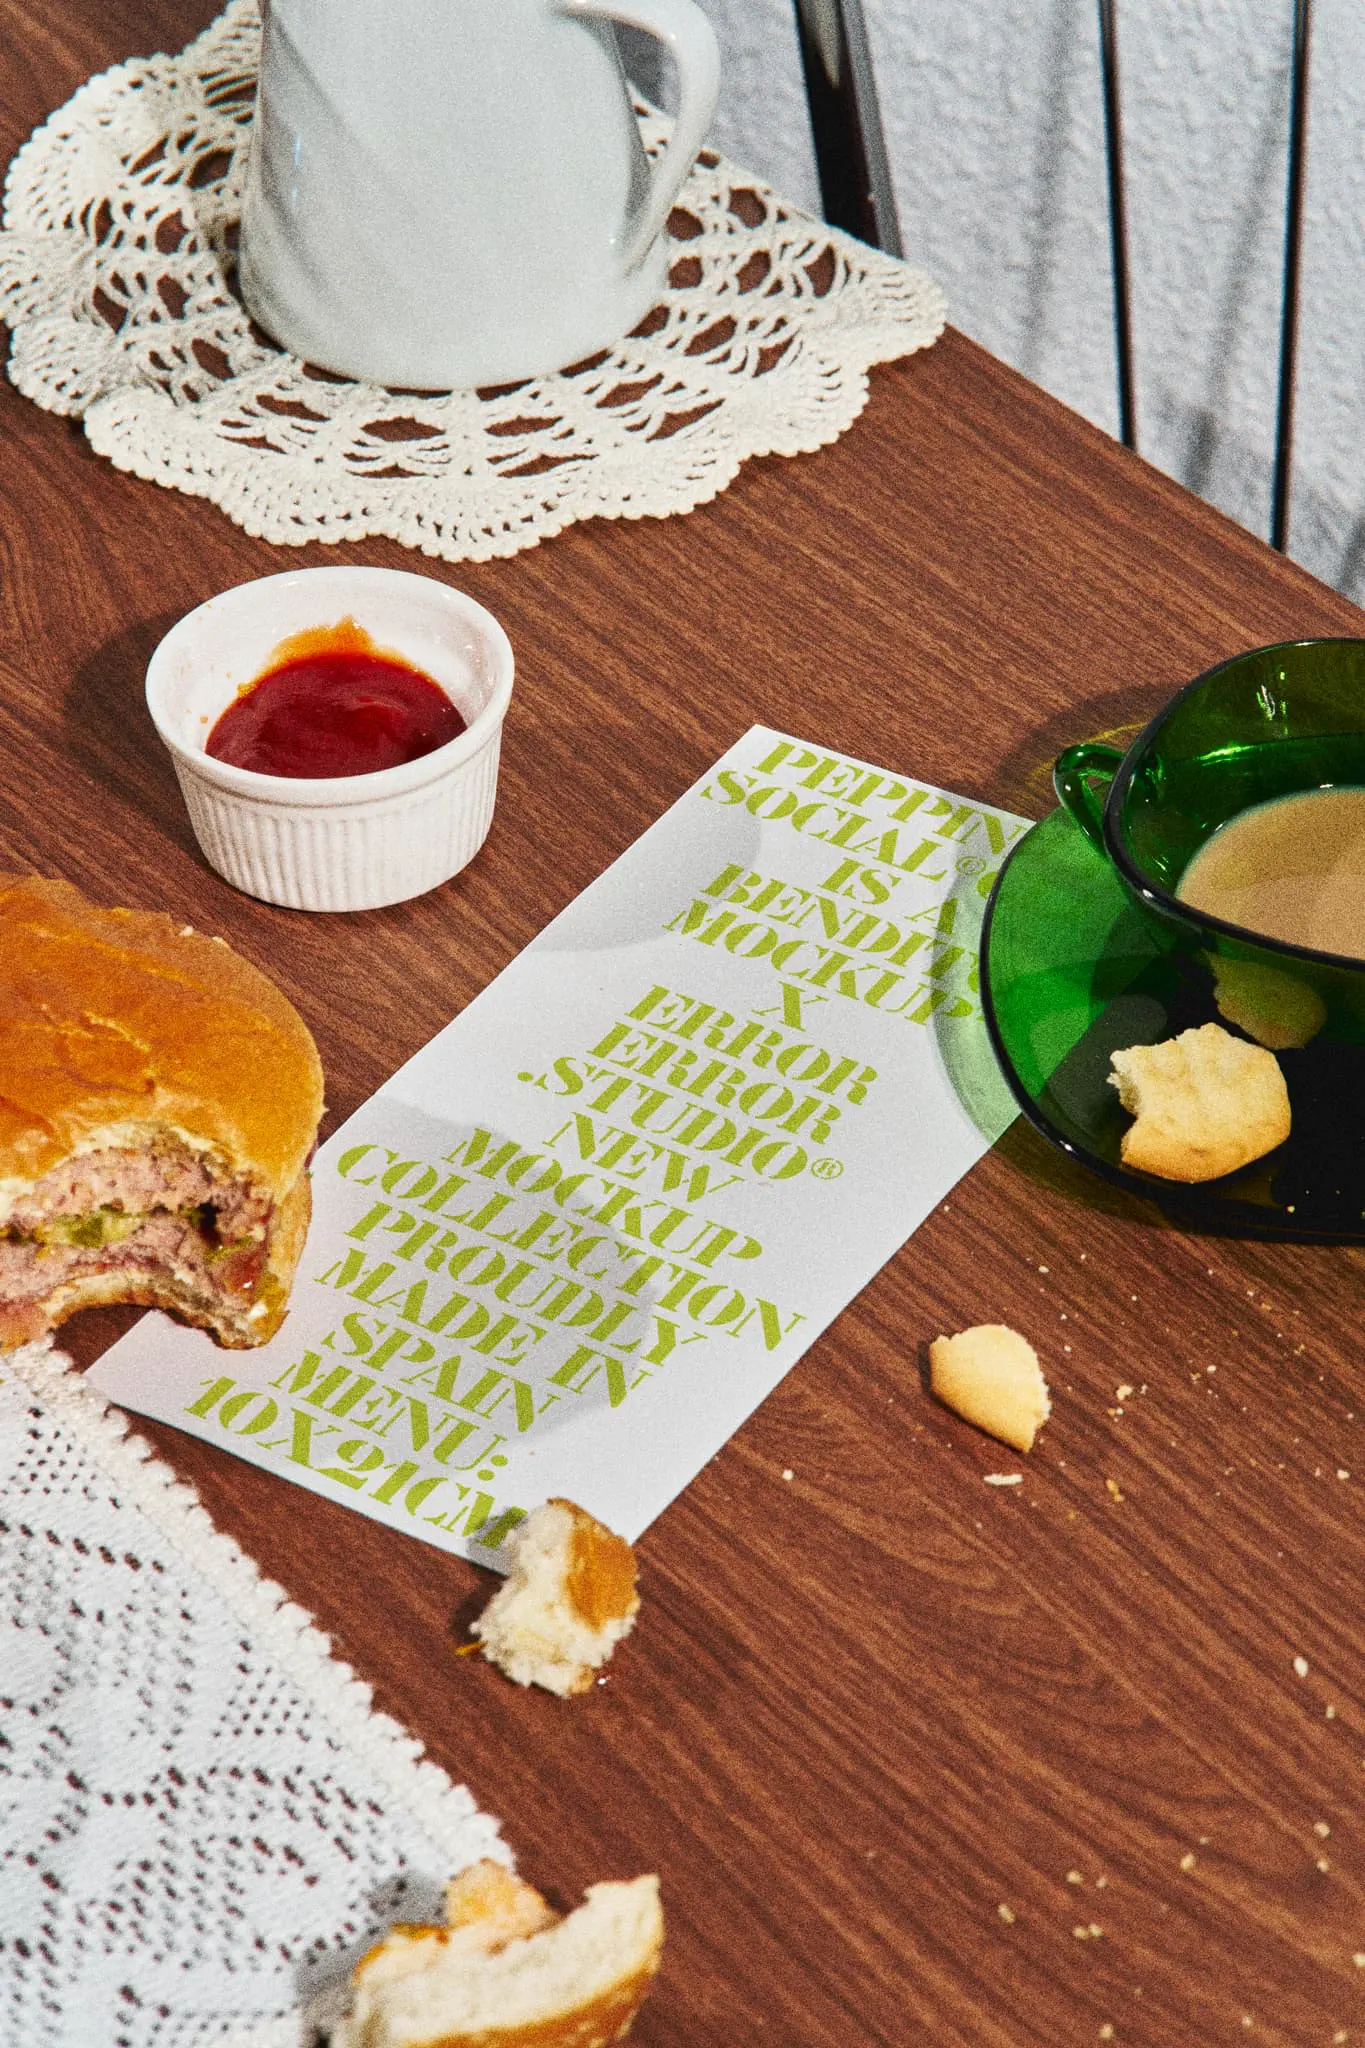 Menu mockup together with a half-eaten hamburger with crumbs, a cup of coffee, and ketchup on a burguer place wooden table with doilies. Takeaway mockup. Restaurant menu PSD file. Print mockup. Fast food mockup. High-quality menu mockup. Burger PSD high-quality editable file.